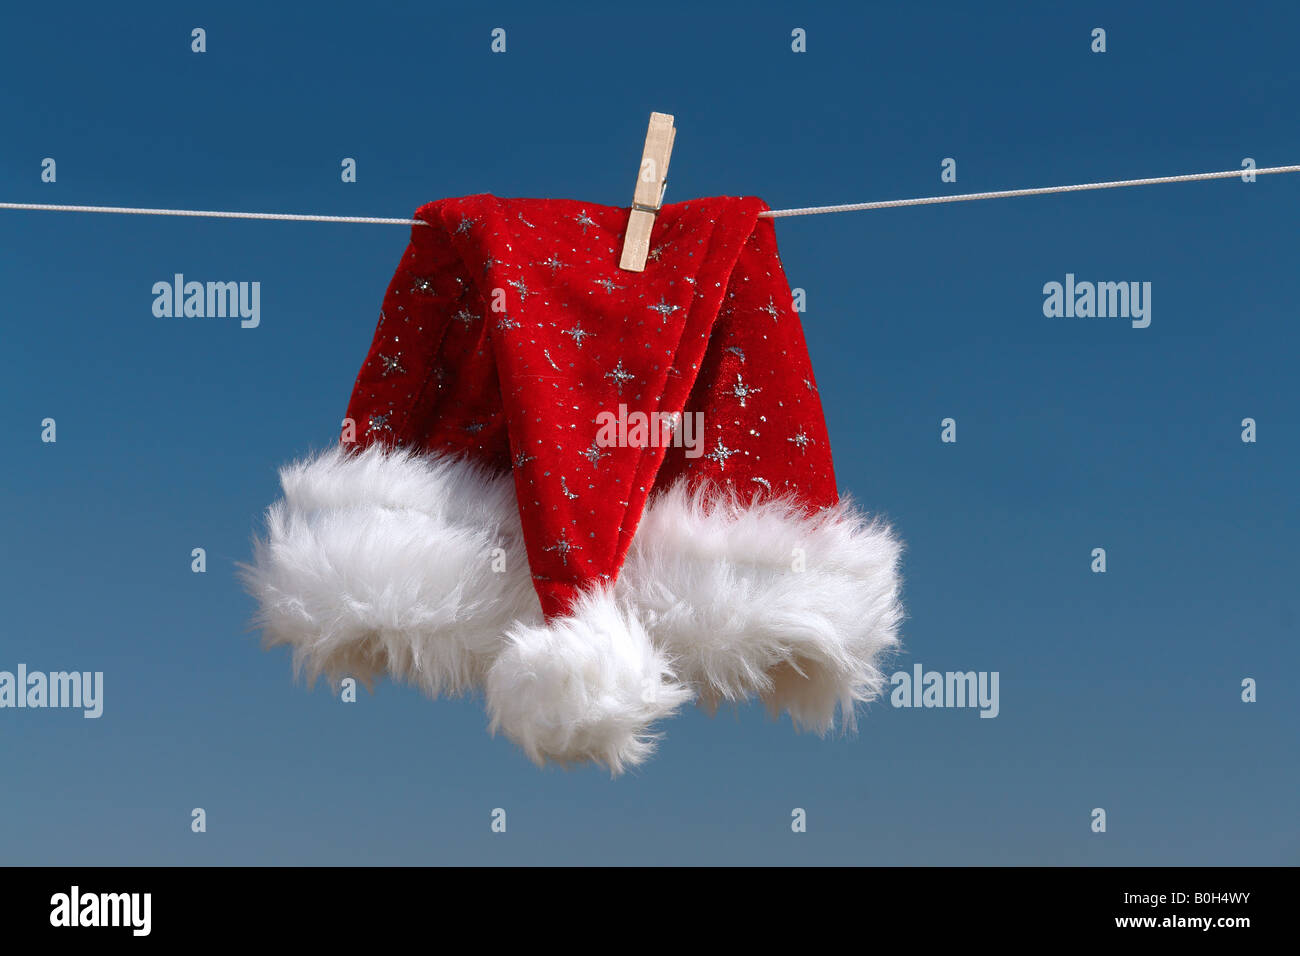 Red santa claus hat drying in the open air hanging on clothes line affixed with wooden peg Stock Photo